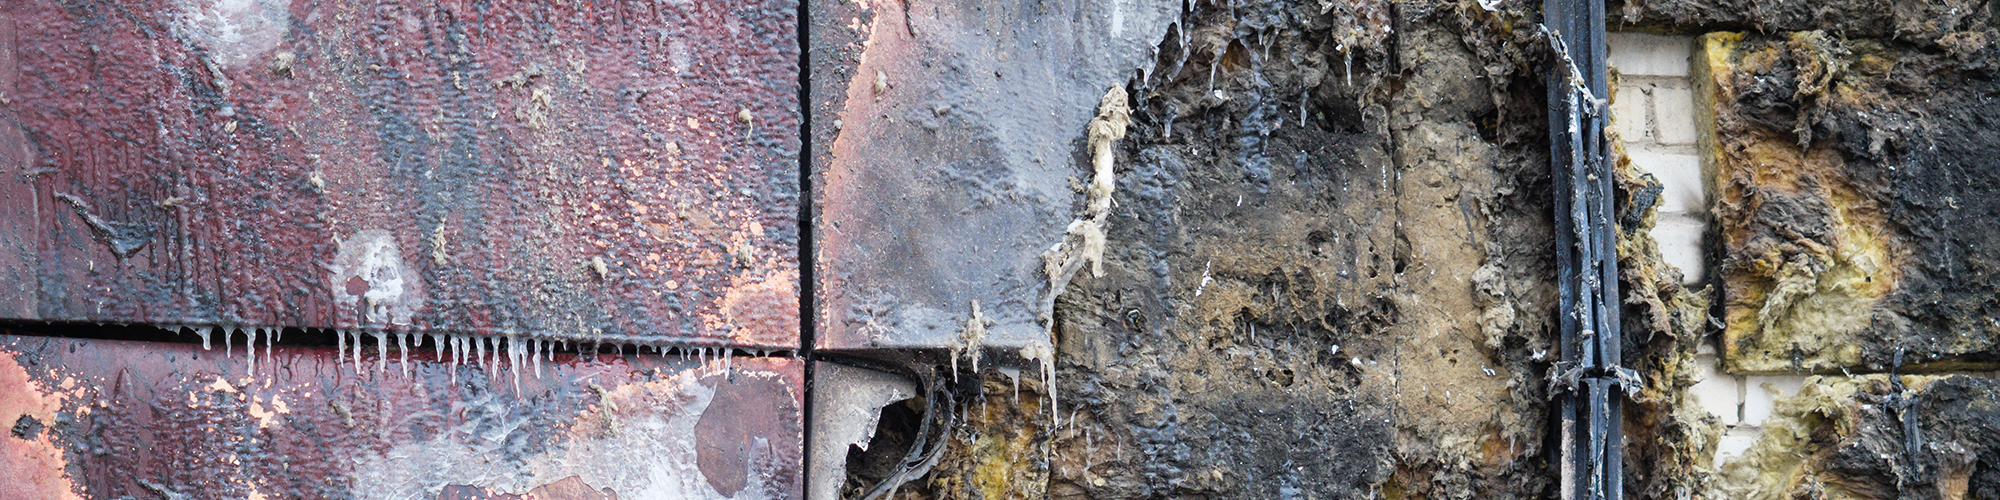 The fire damaged exterior of a panel clad apartment building. SAM Conveyancing's guide on Staircasing or Remortgaging with dangerous cladding 